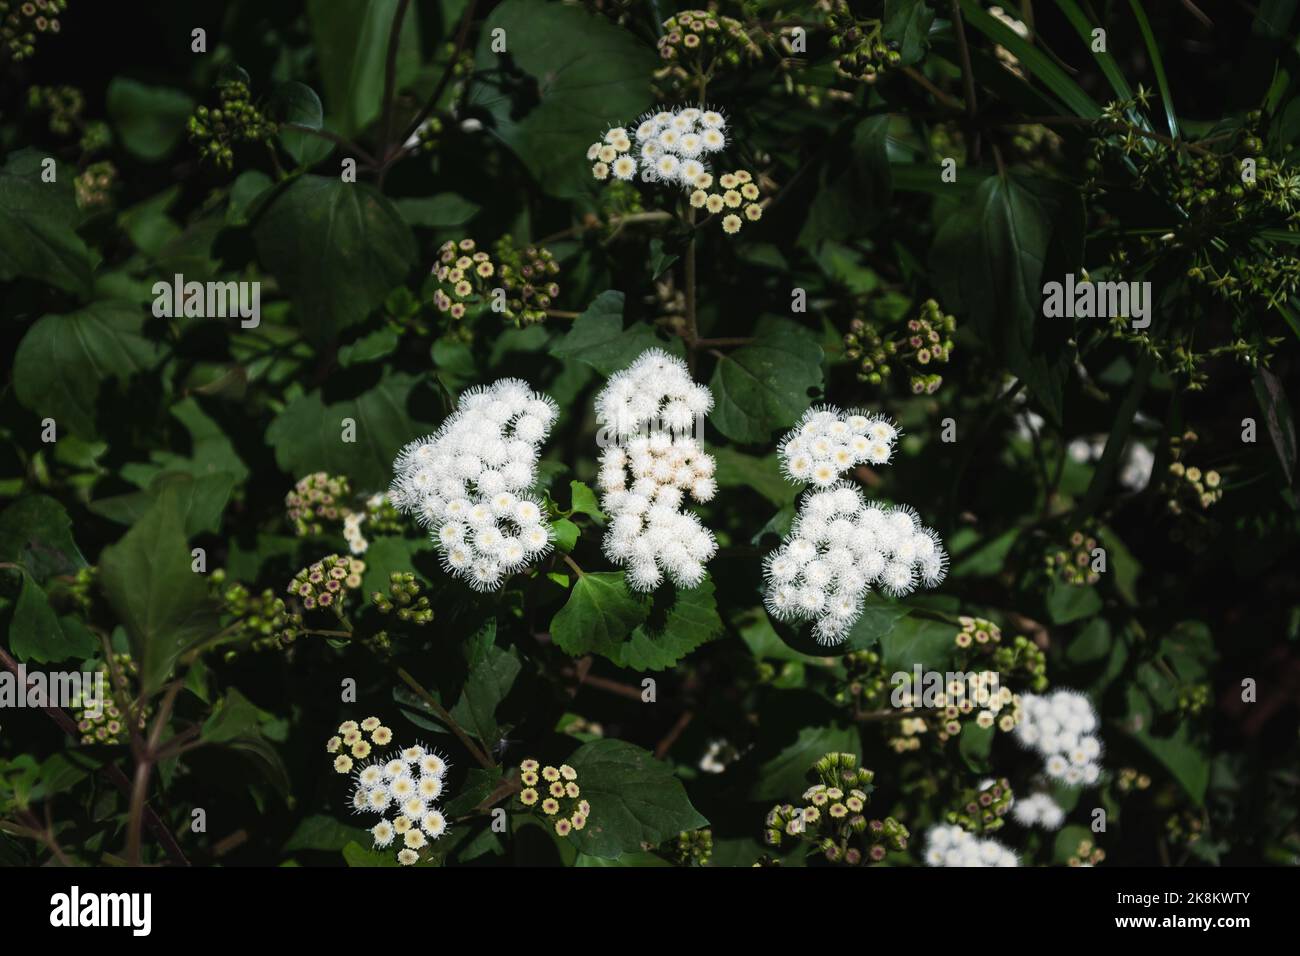 Ageratina adenophora, also known as Crofton weed surrounded by other plants Stock Photo